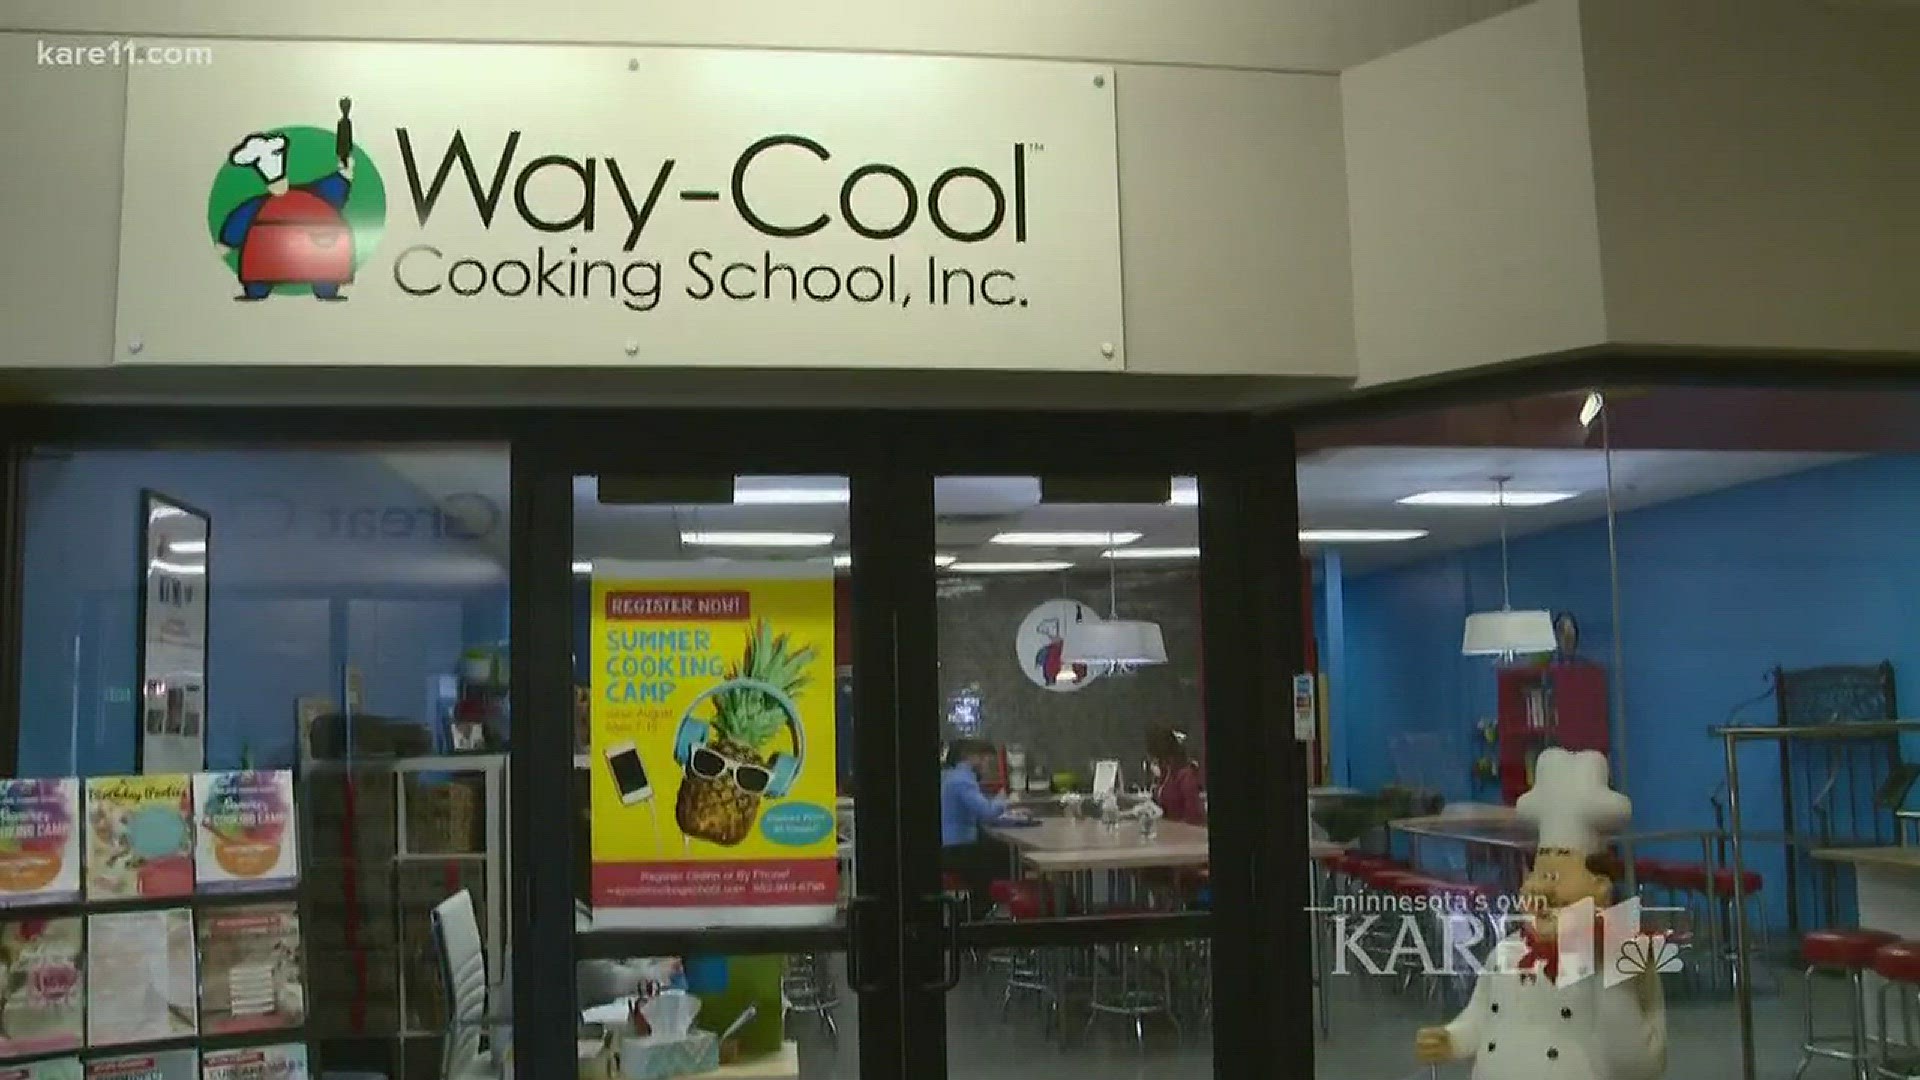 If you're looking for a different kind of summer camp for the little chef in your family, look no further than the Way Cool Cooking School. http://kare11.tv/2FxkMnu